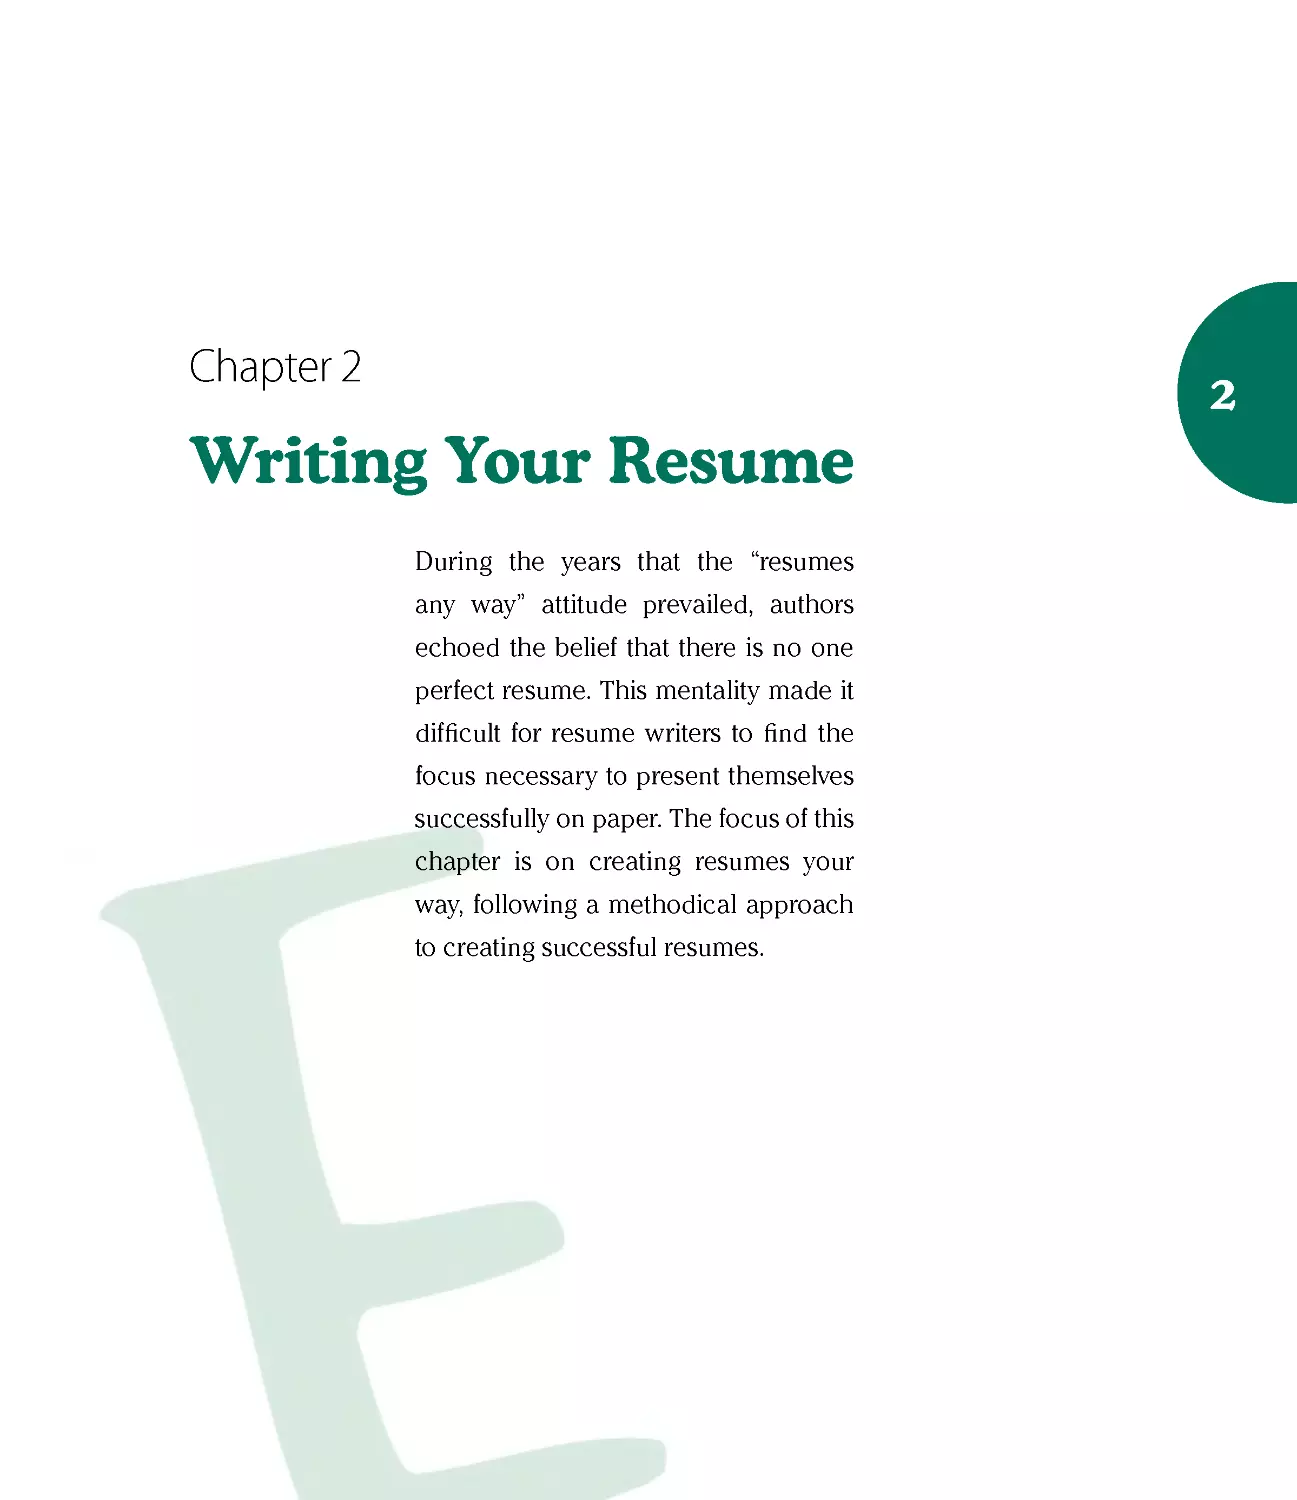 Chapter 2: Writing Your Resume